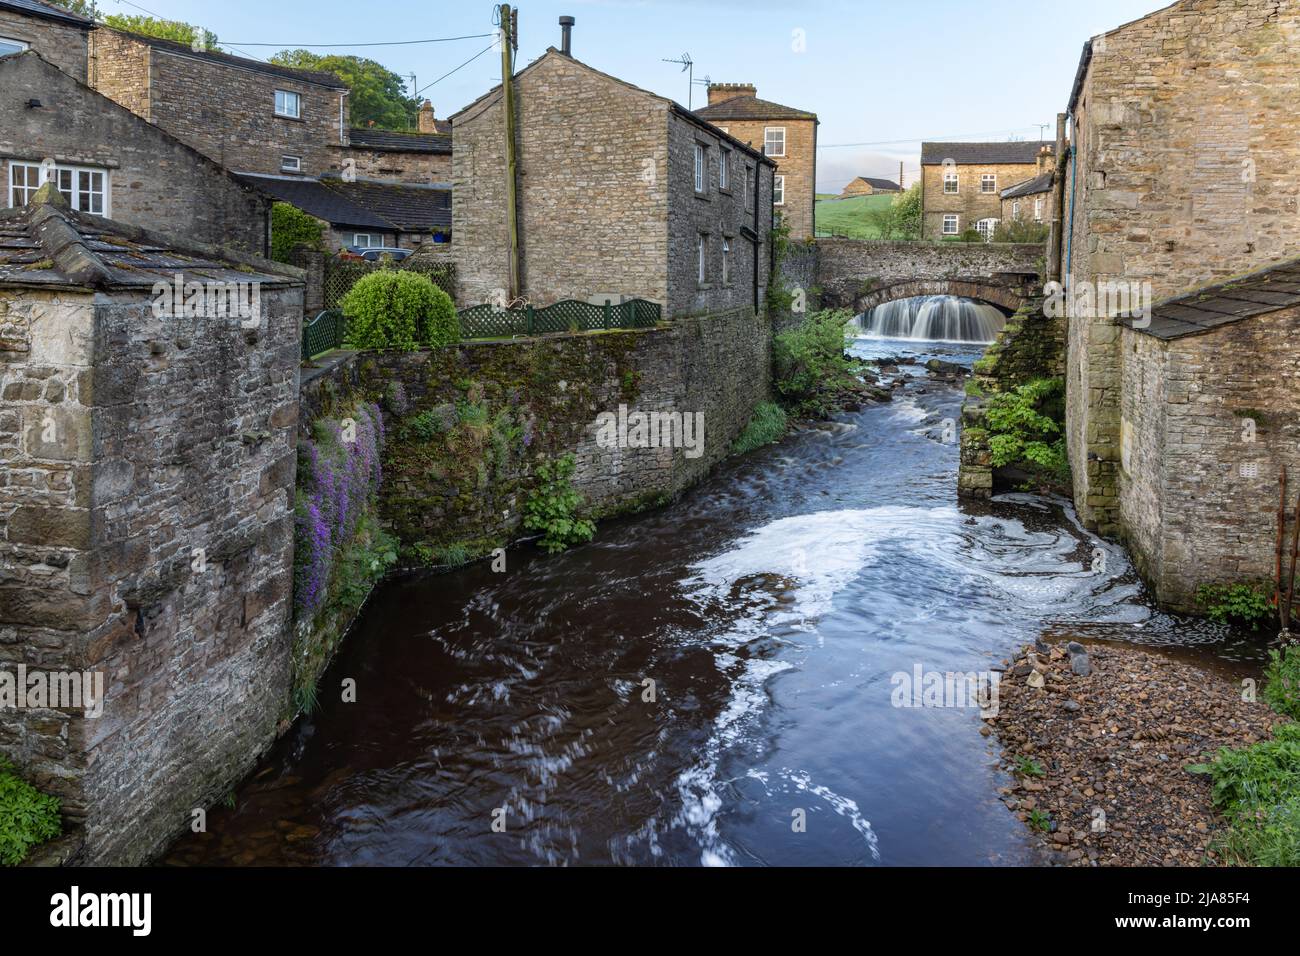 Gayle Beck runs through the centre of the picturesque Yorkshire Dales town of Hawes, Wensleydale, England, Uk Stock Photo